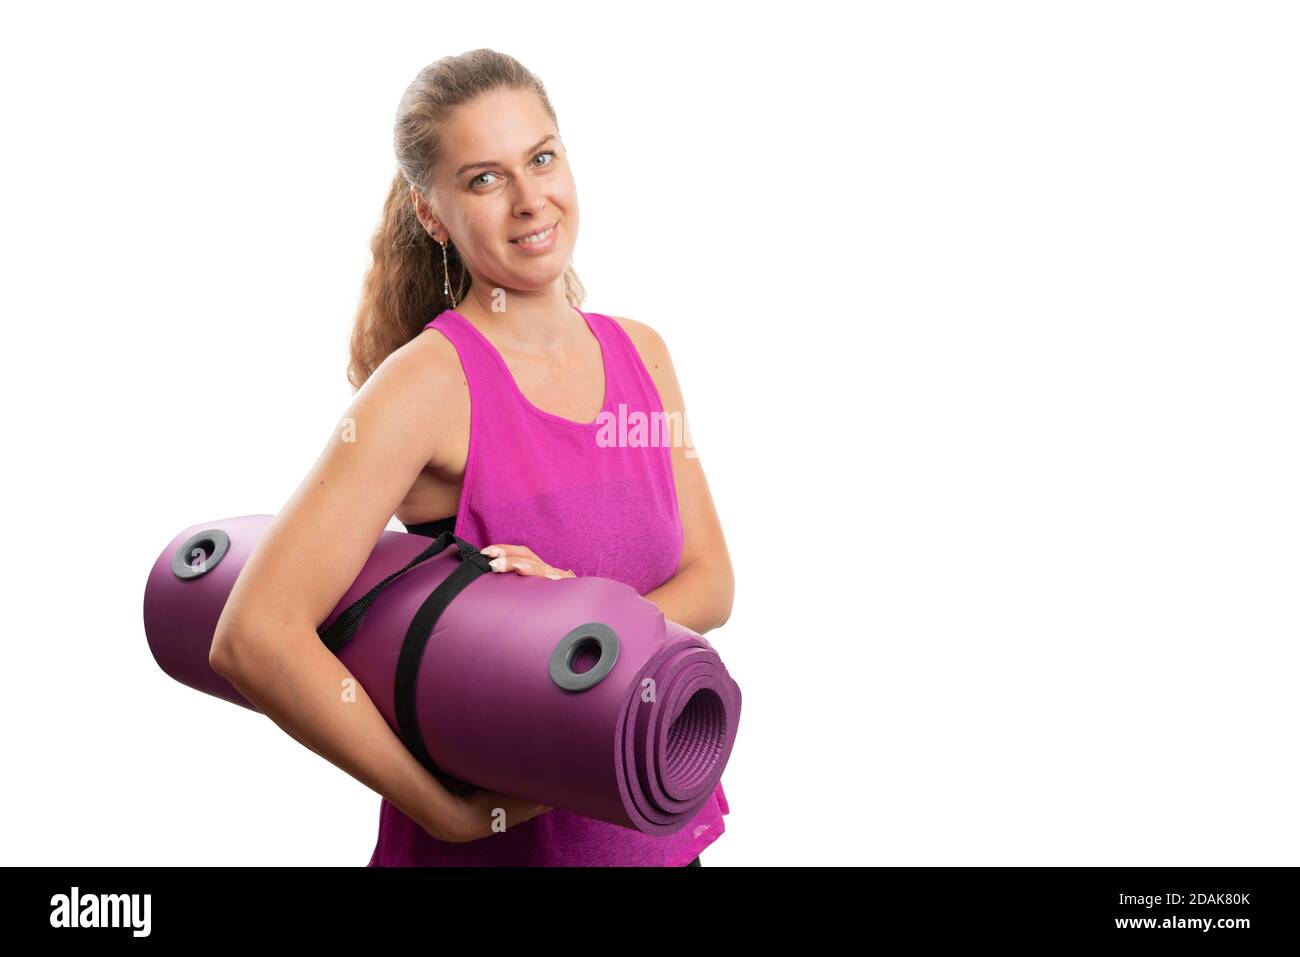 Friendly adult sporty woman model holding yoga mat wearing workout pink tanktop as active sportive lifestyle concept isolated on white background with Stock Photo